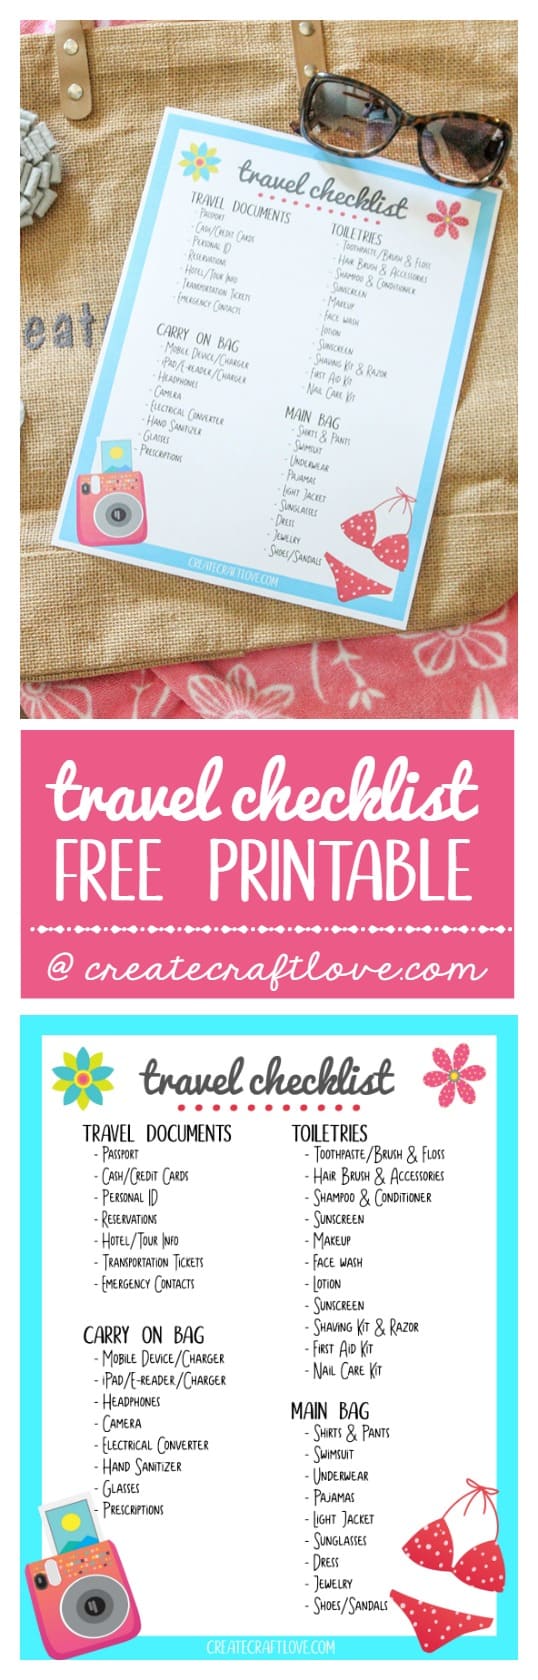 Get organized packing for summer vacation with this Travel Checklist Printable!